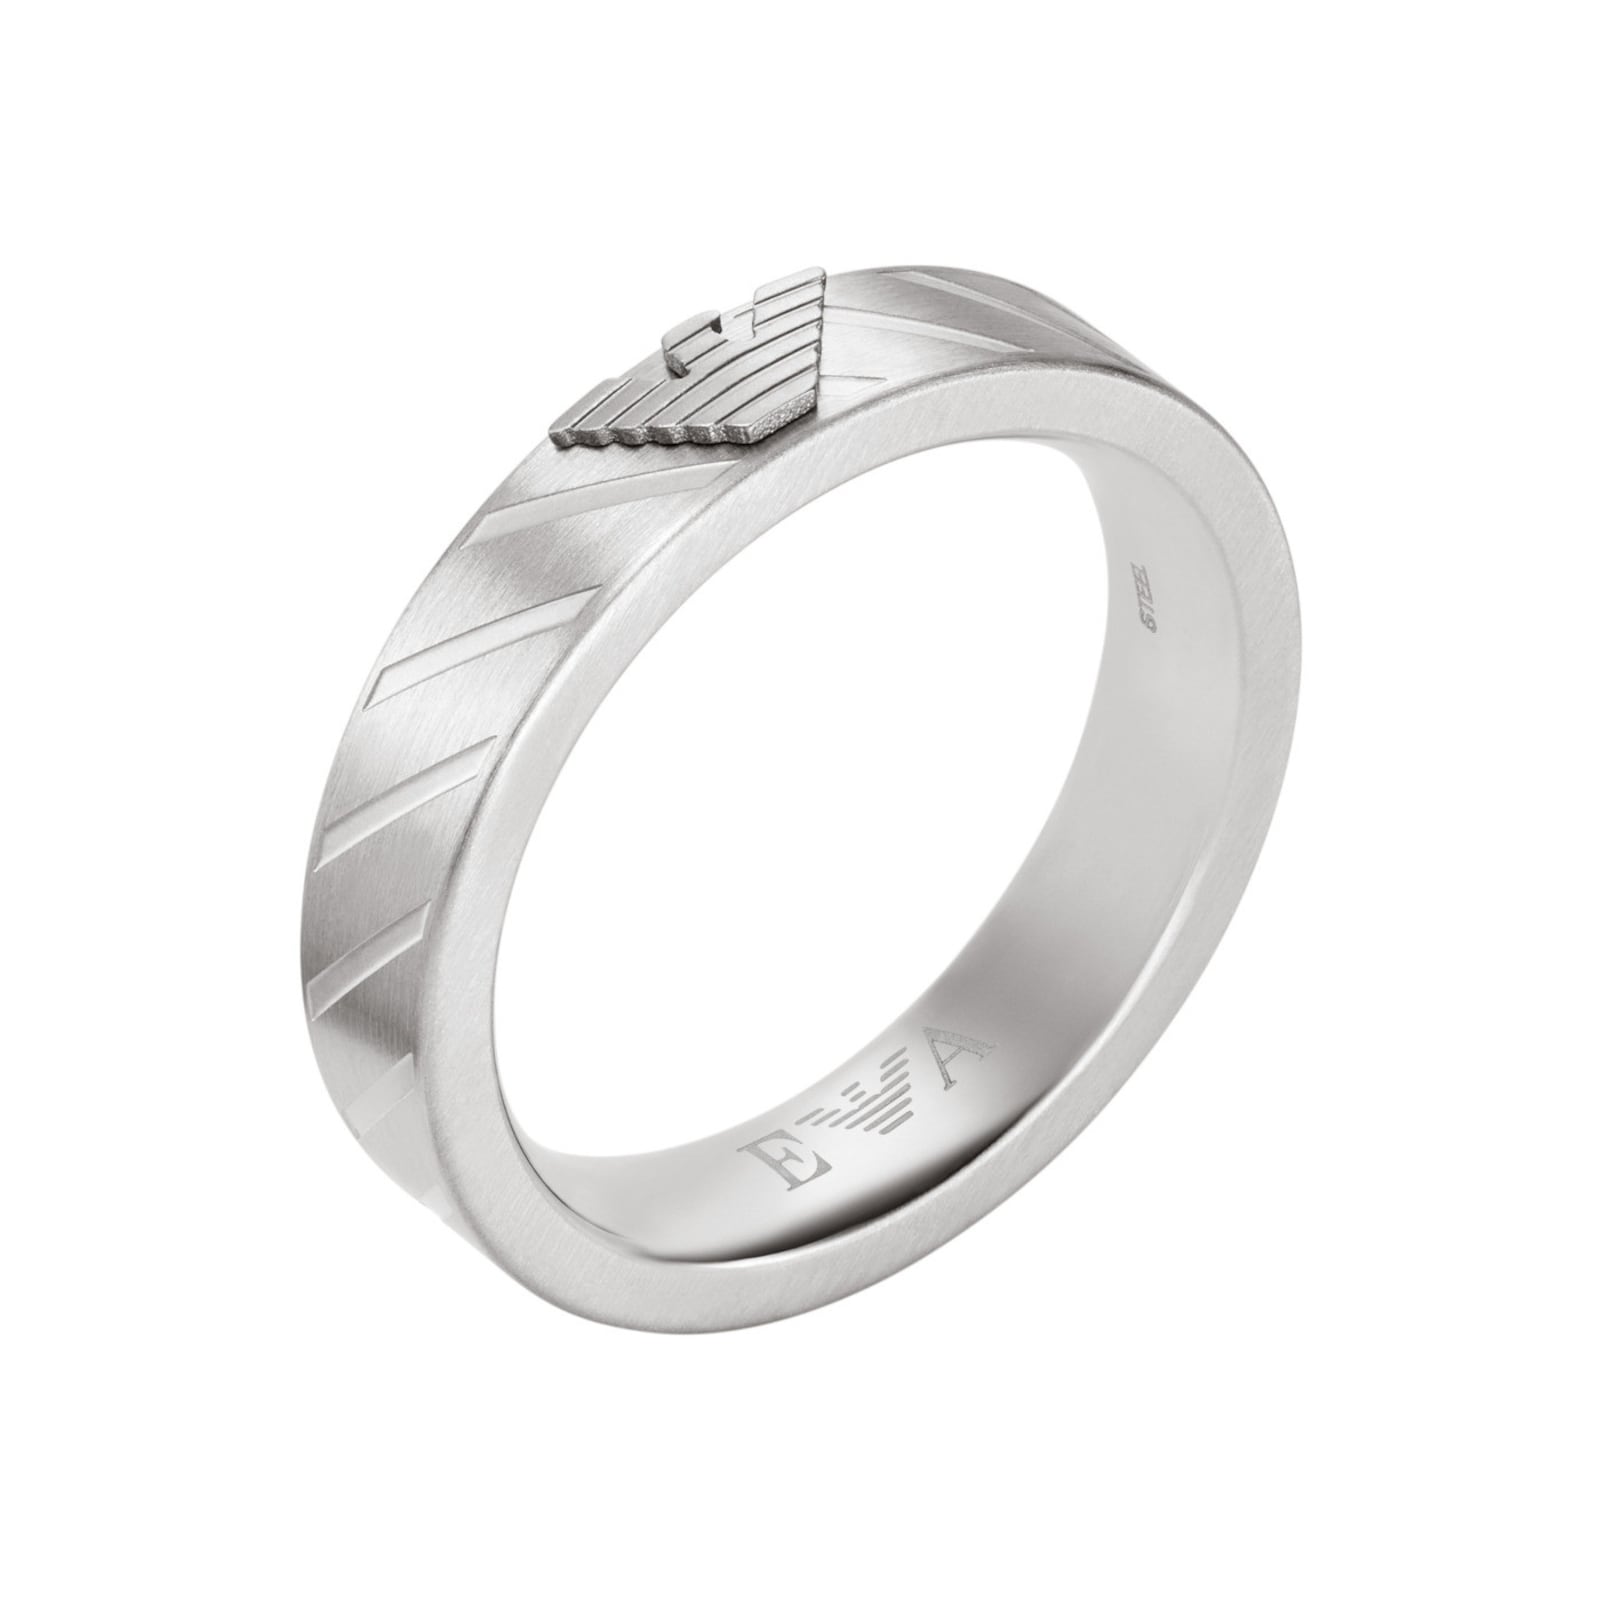 Emporio Armani Mens Stainless Steel Ring EGS2924040 | Goldsmiths